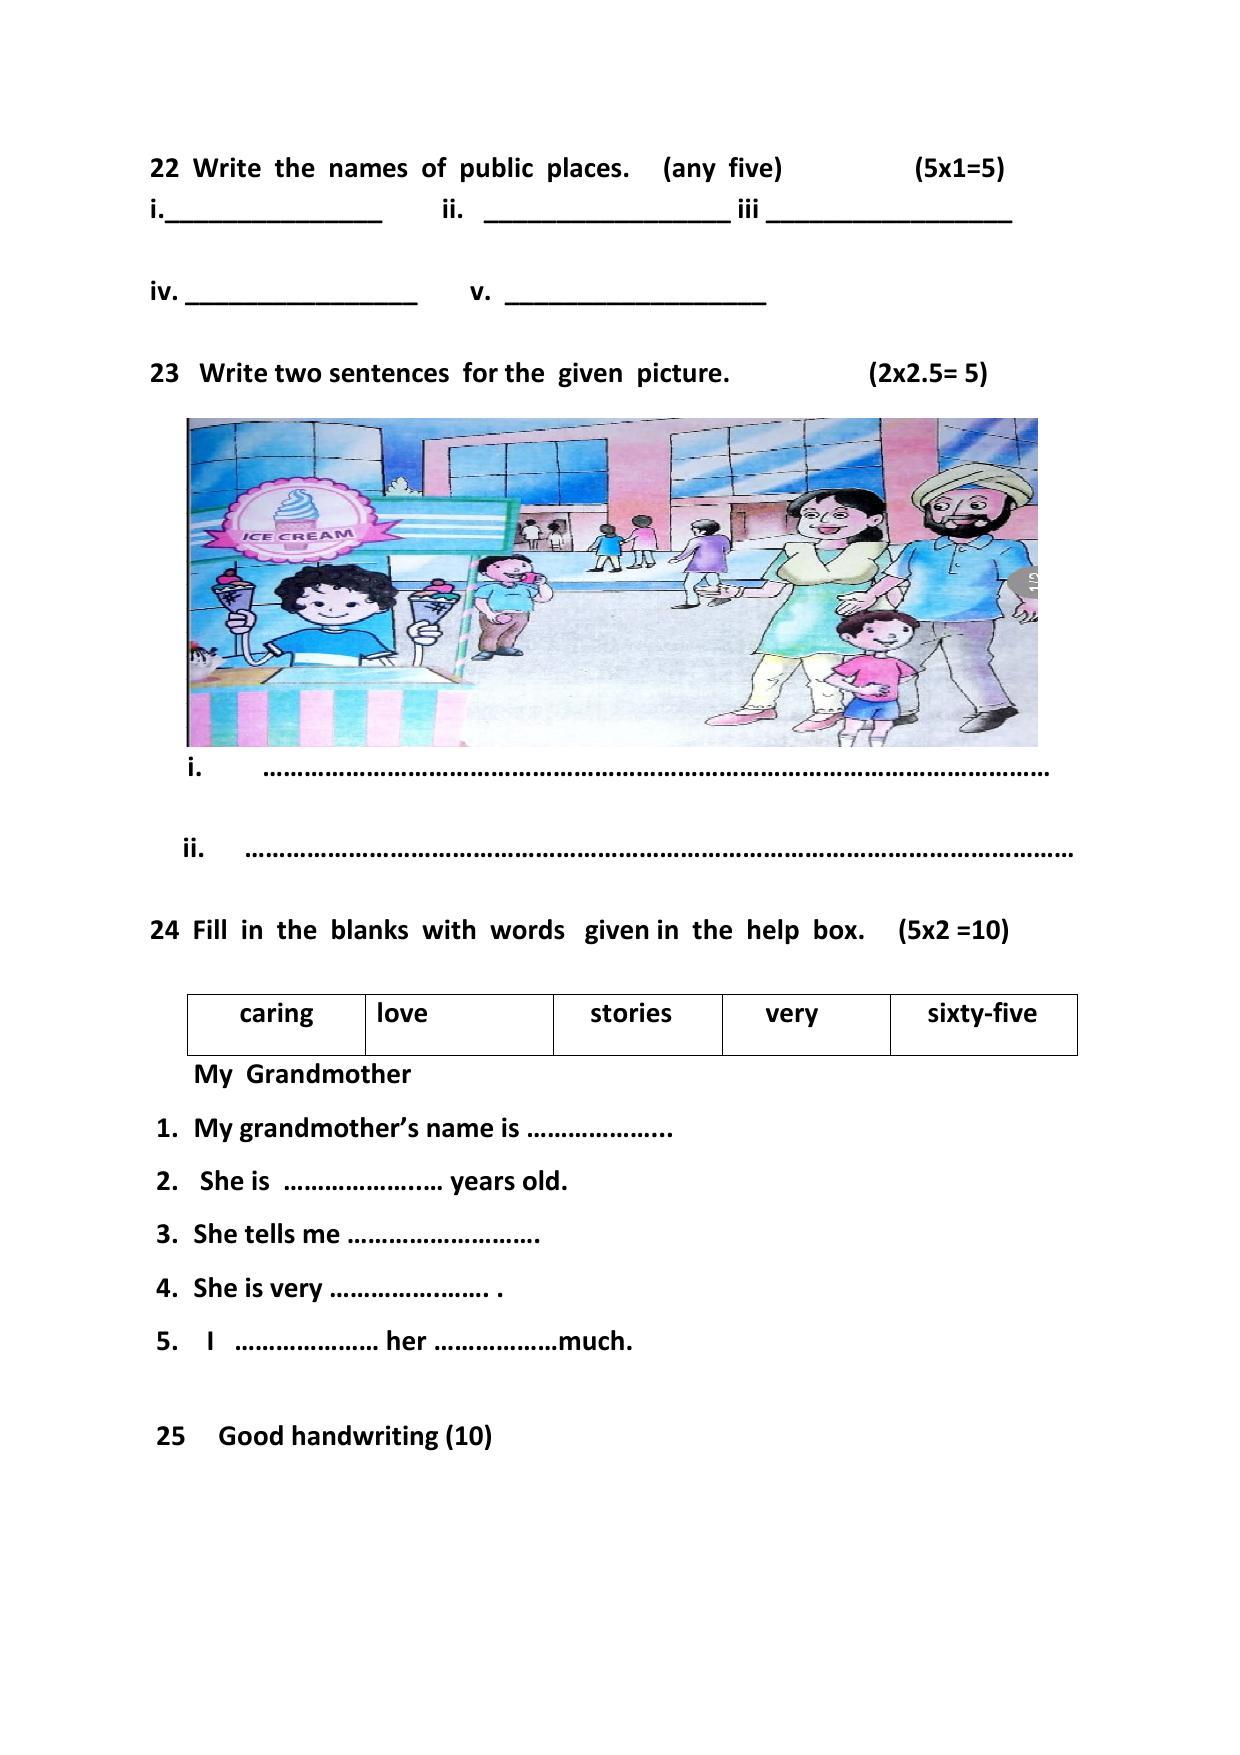 PSEB Class 5 English Model Papers - Page 5